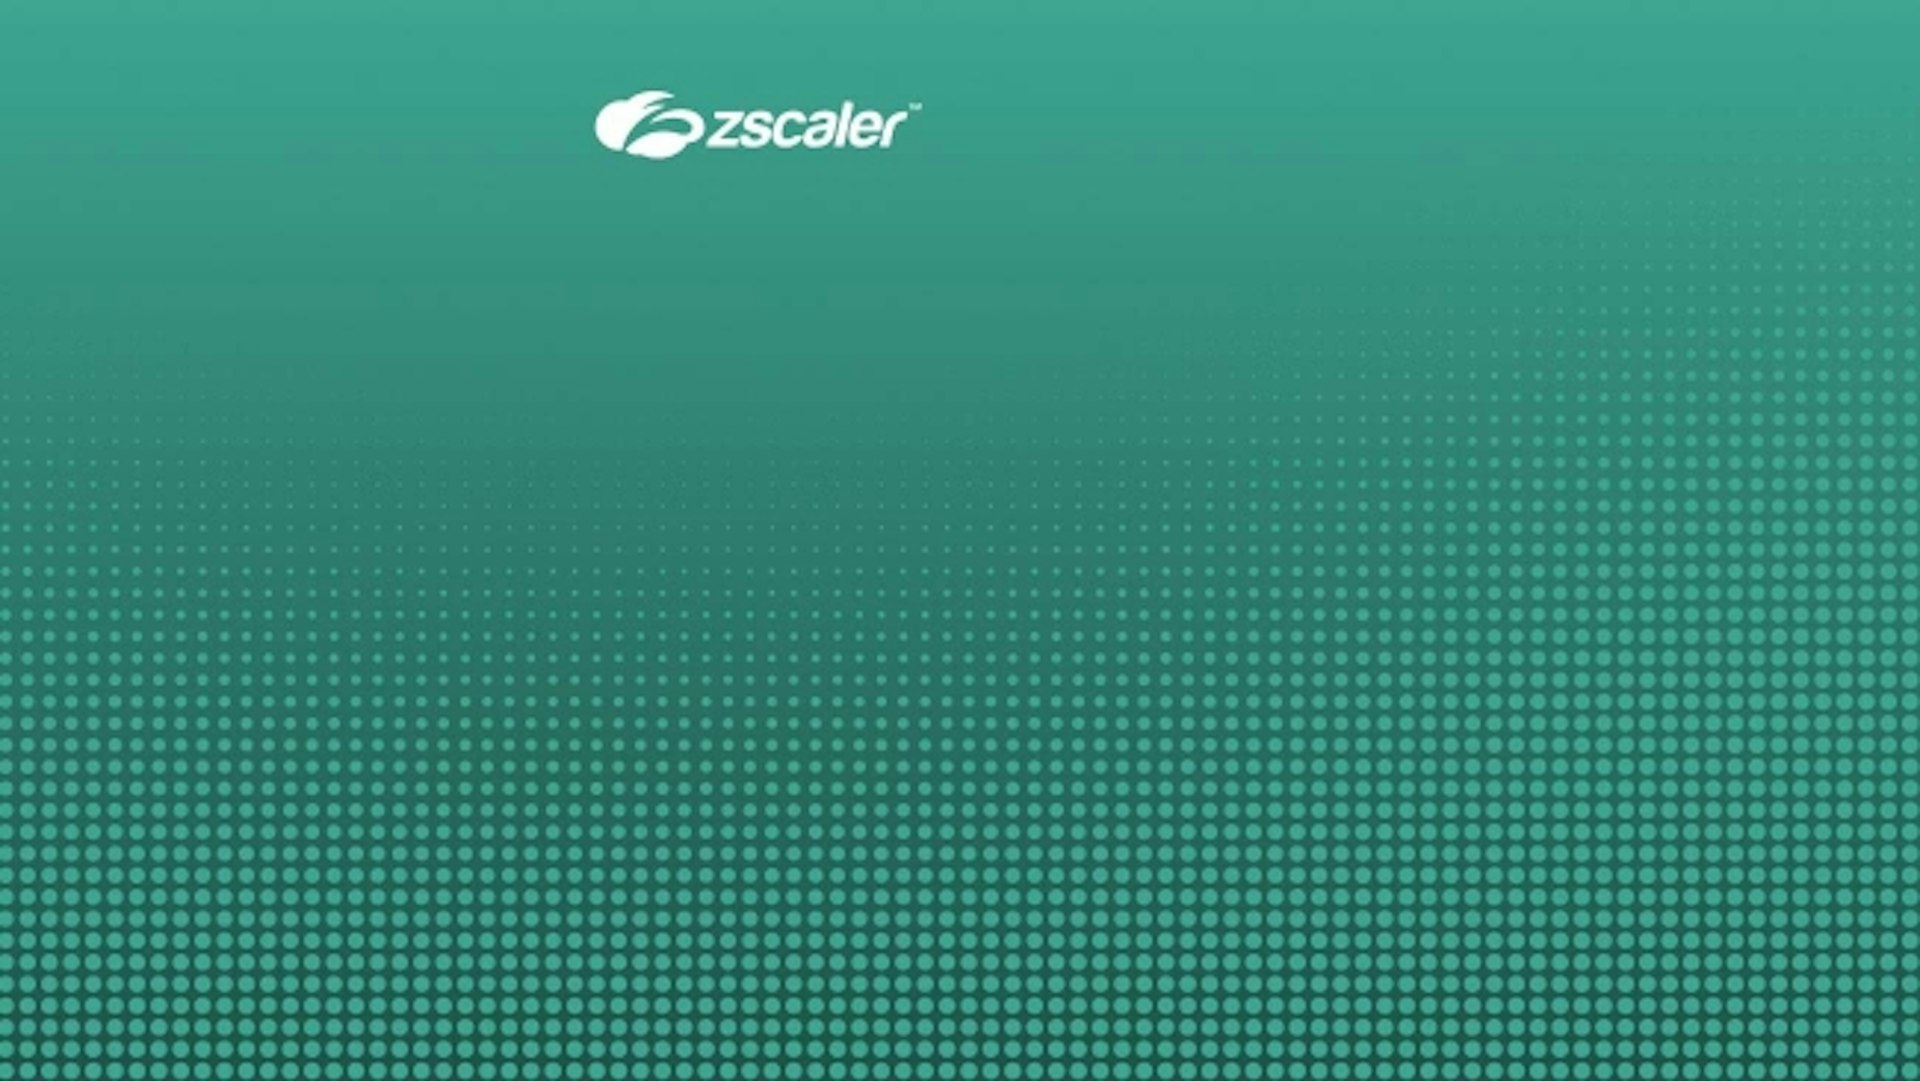 Zscaler Internet Access (ZIA) and CrowdStrike: Zero Trust Access Control Based on Device Security Posture